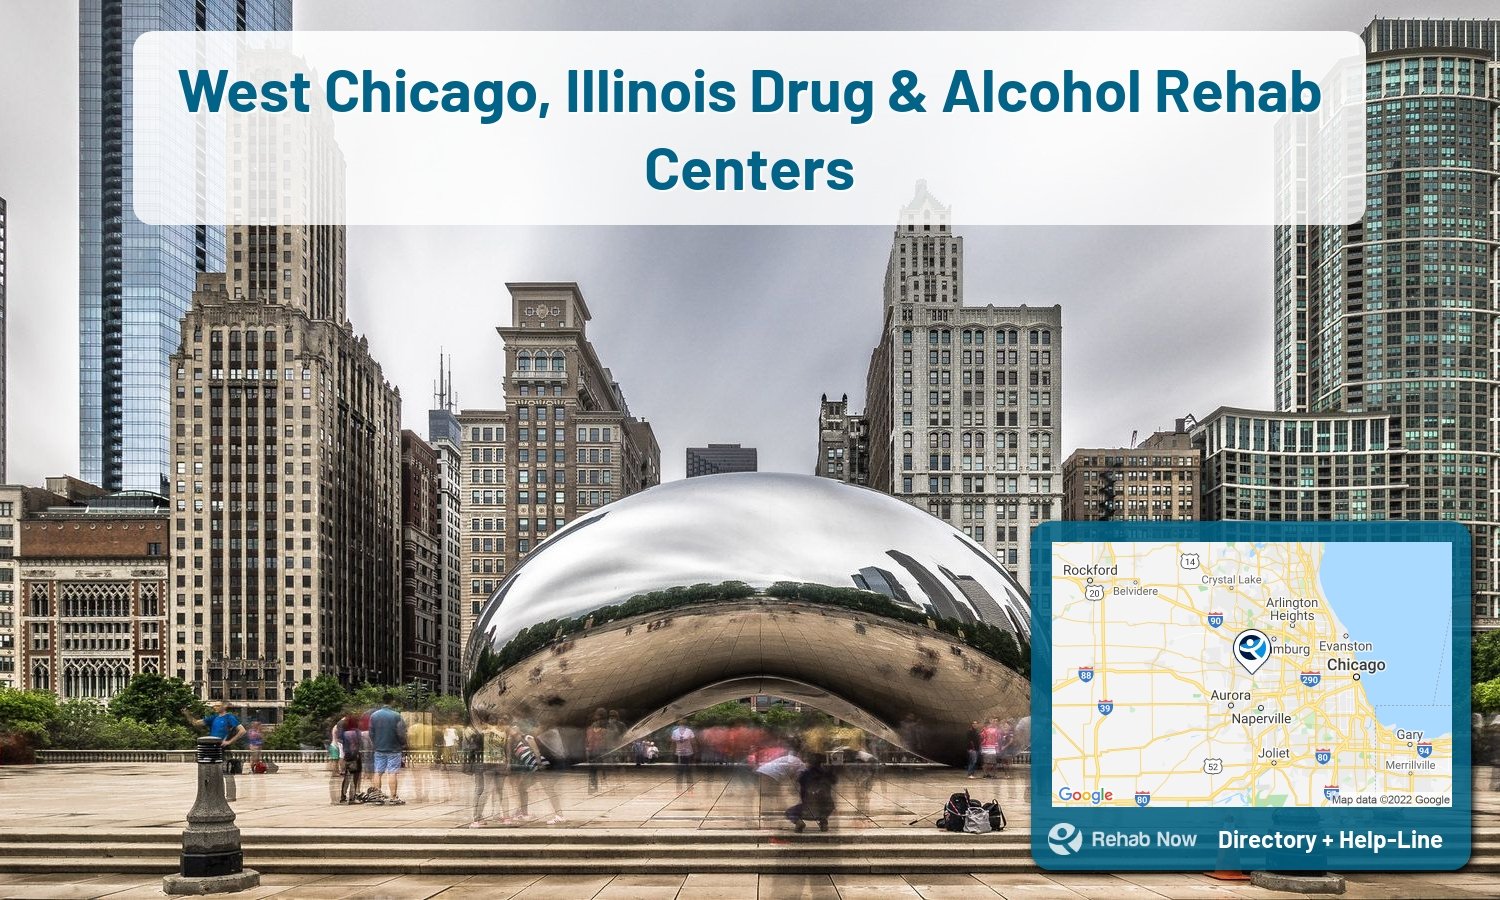 Let our expert counselors help find the best addiction treatment in West Chicago, Illinois now with a free call to our hotline.